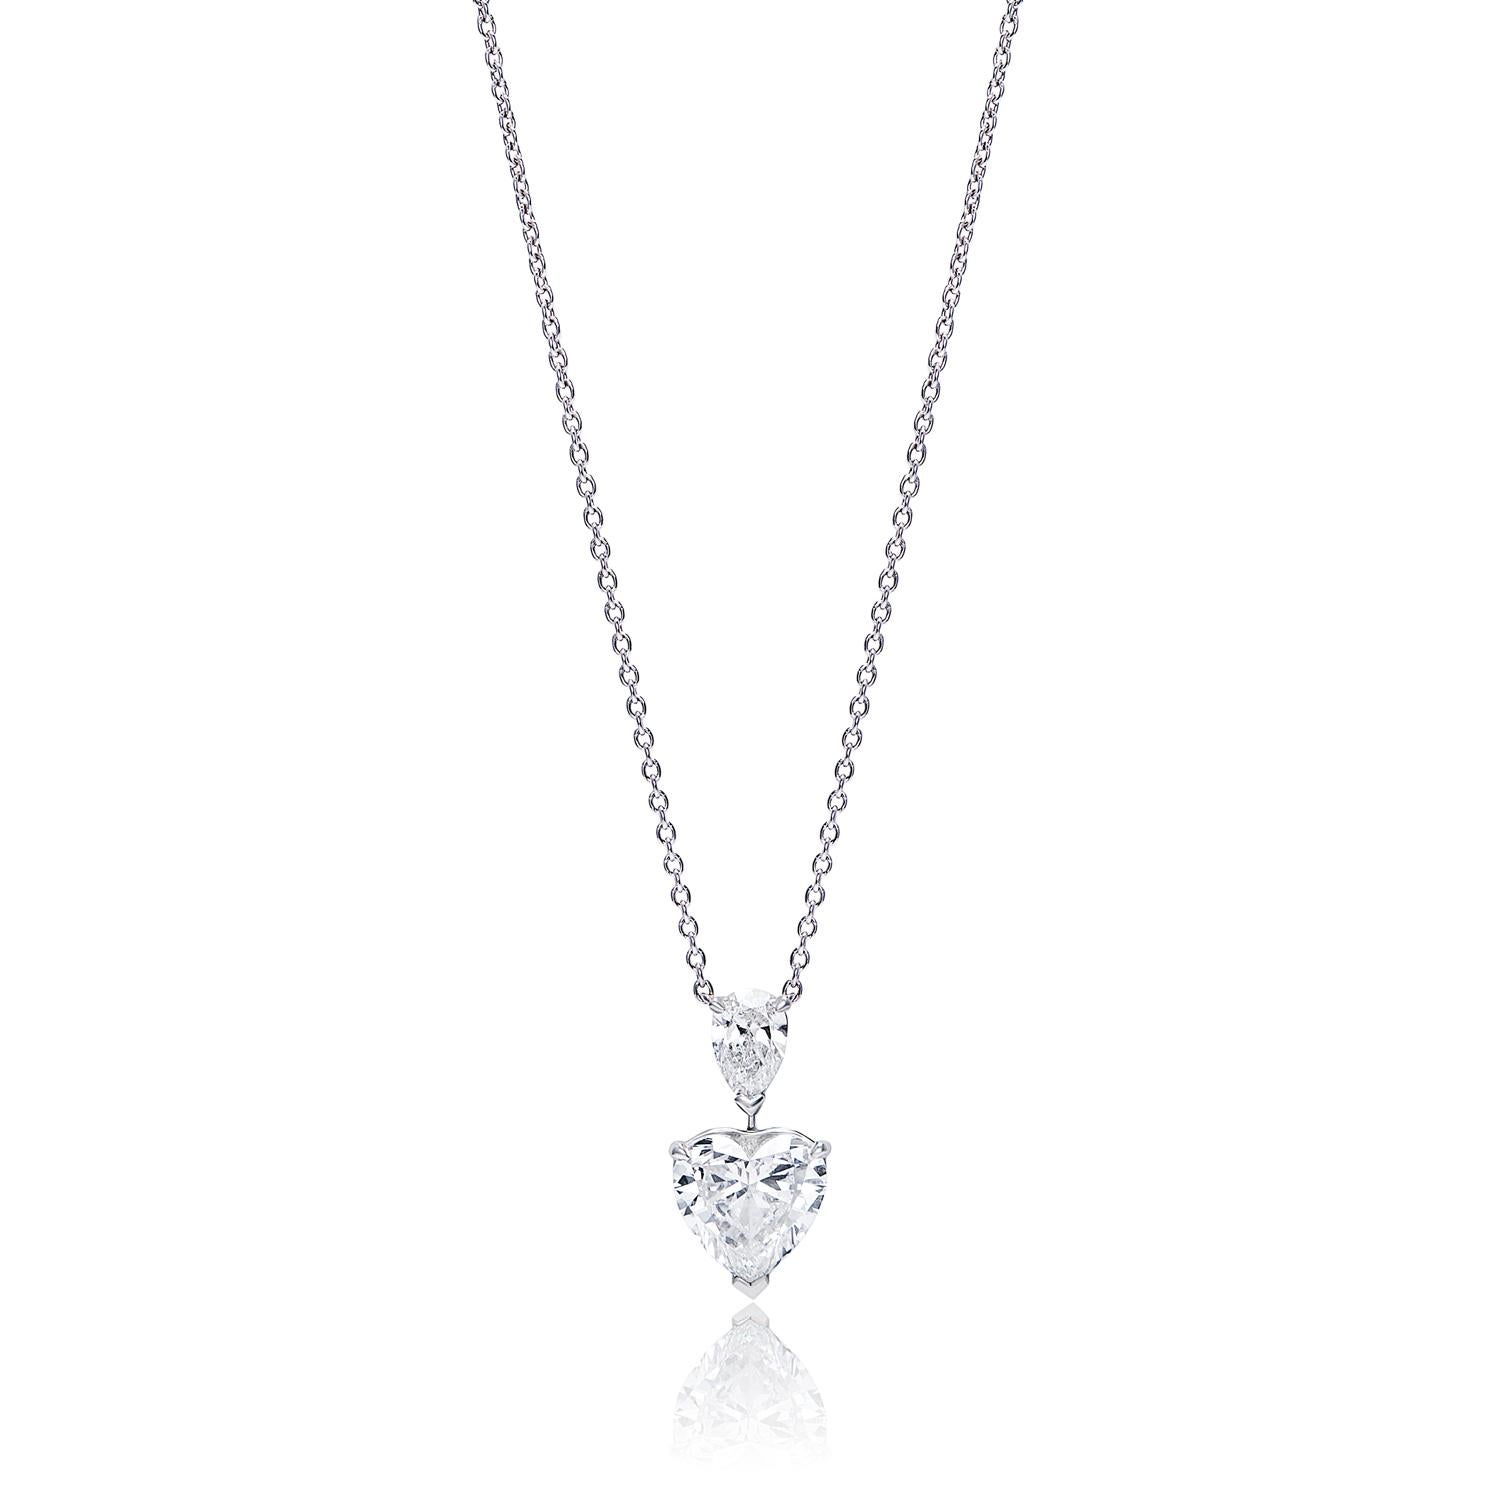 This gorgeous pendant features a 3.25 carat D VS1 diamond, set in a beautiful heart shape. The upper diamond is a 0.52 carat D SI1, set in a pear shape. These diamonds are set in platinum chains and make the perfect addition to any outfit. Whether